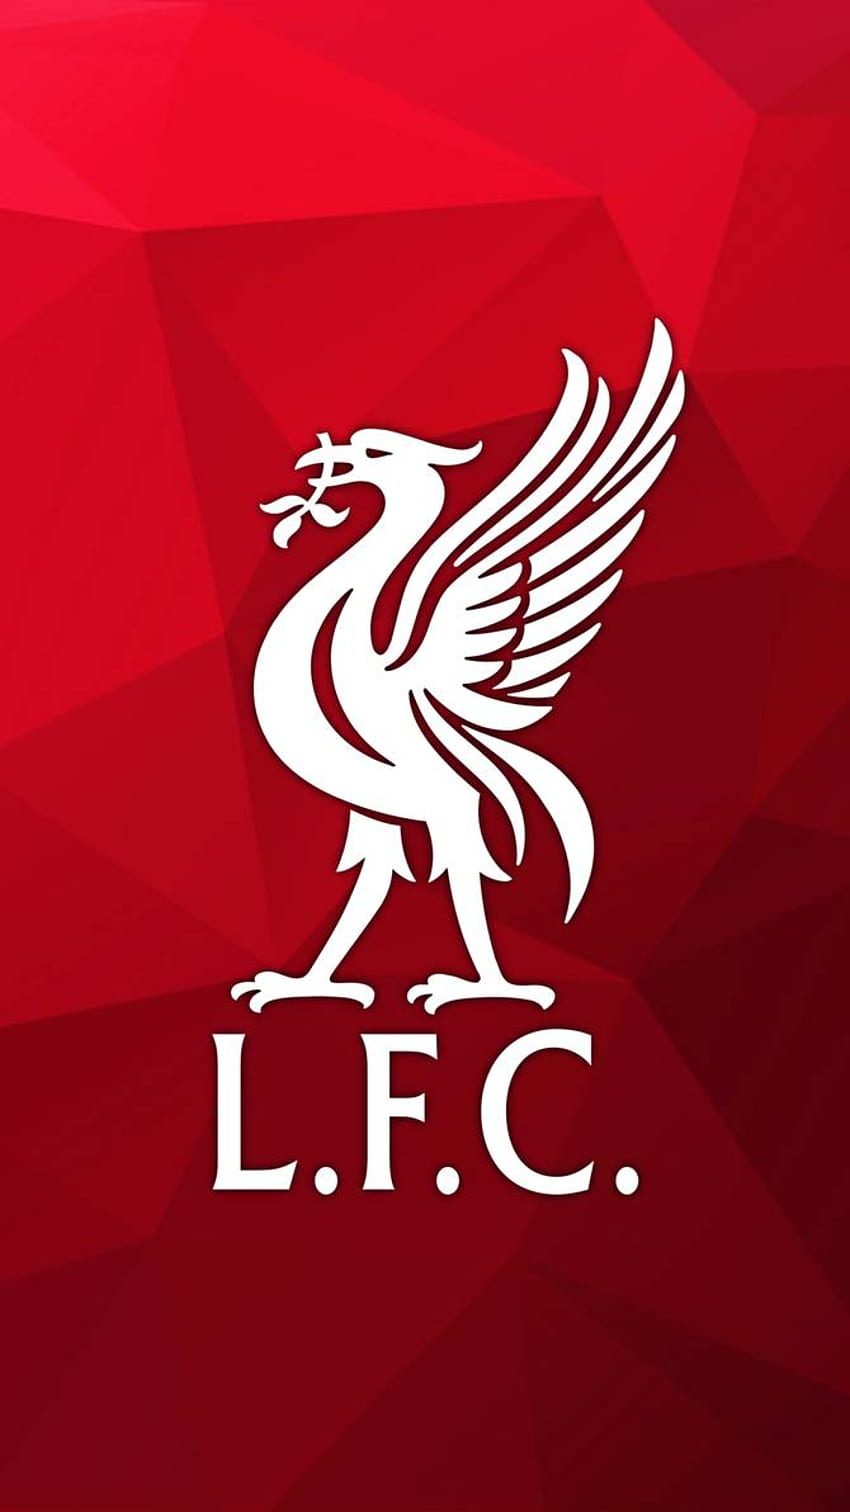 Liverpool FC Logo for iPhone and Android mobiles - Liverpool Core, Bird Logo HD phone wallpaper